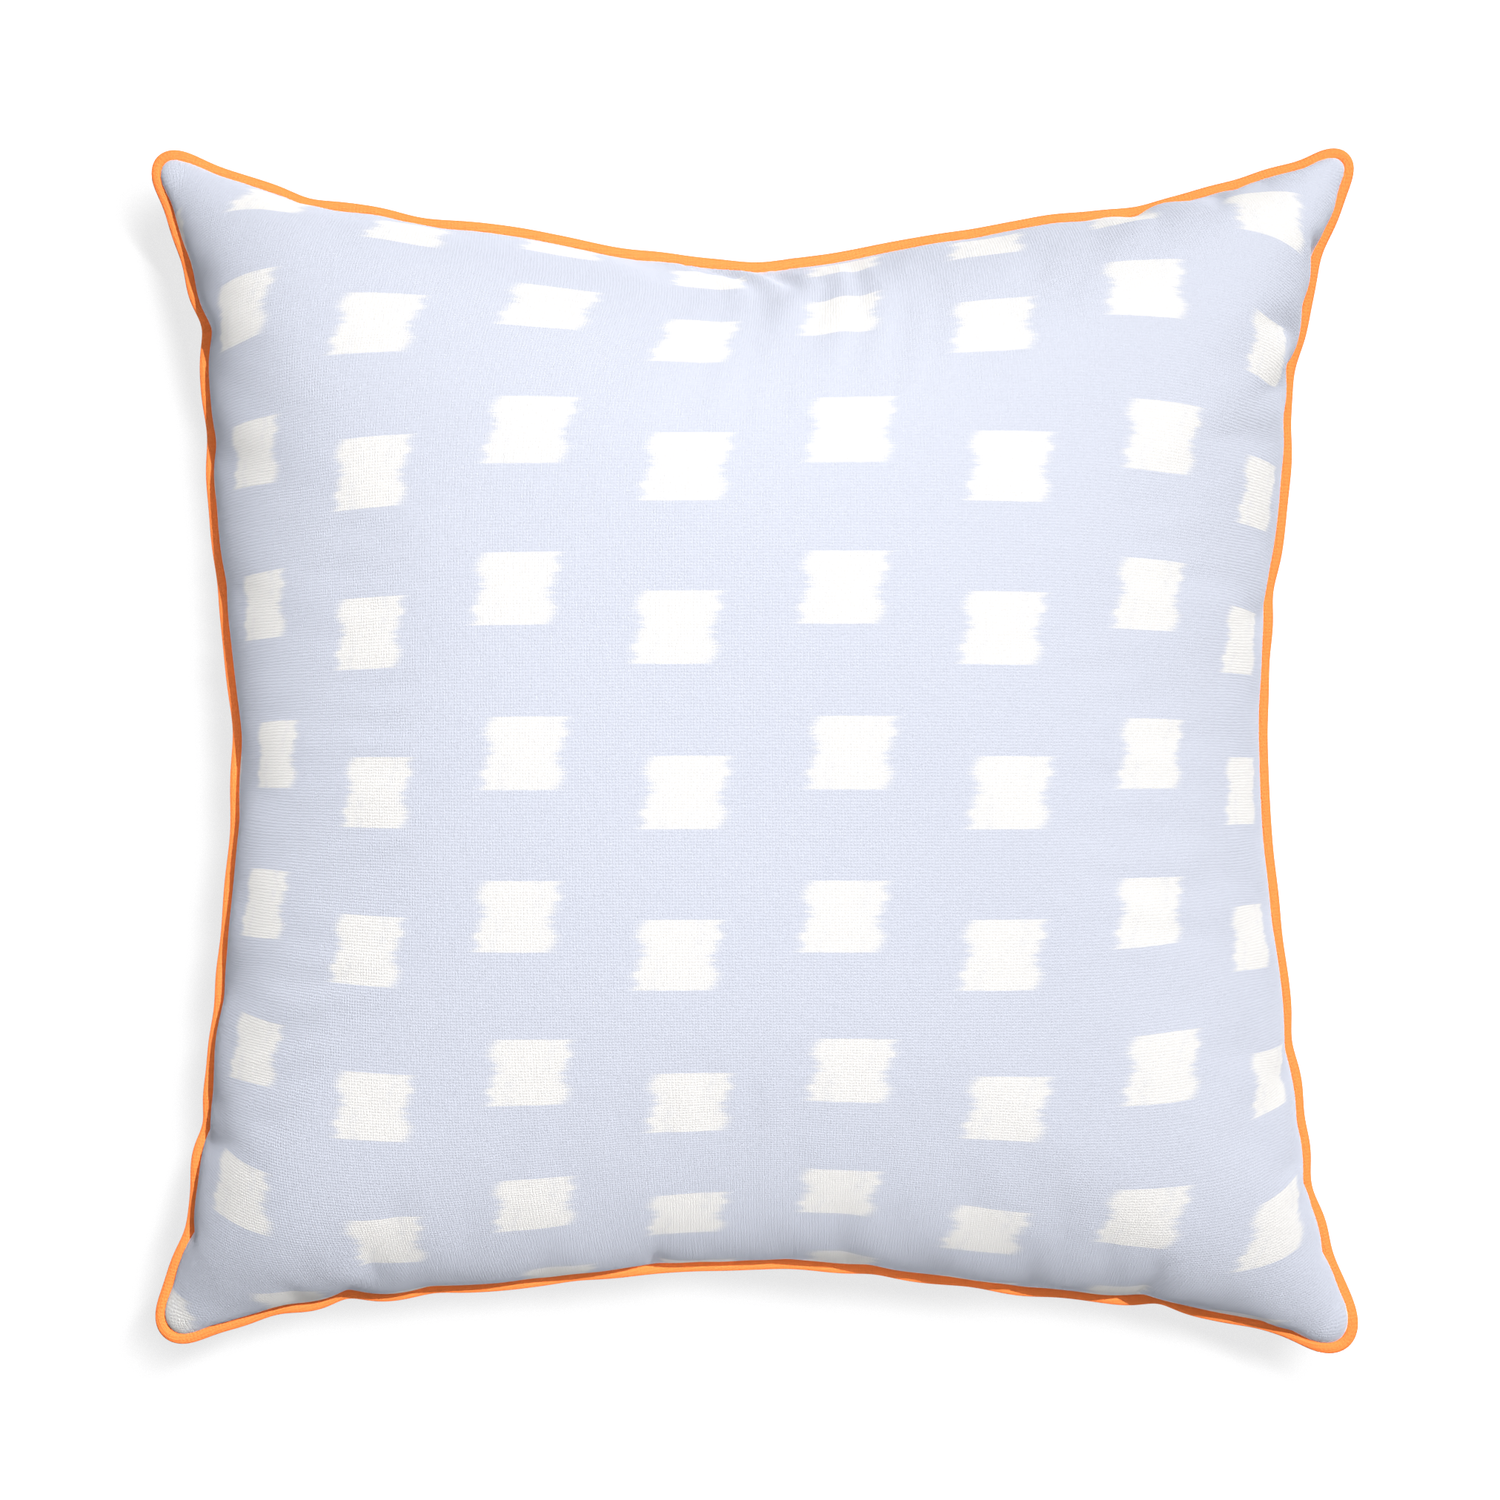 Euro-sham denton custom pillow with clementine piping on white background